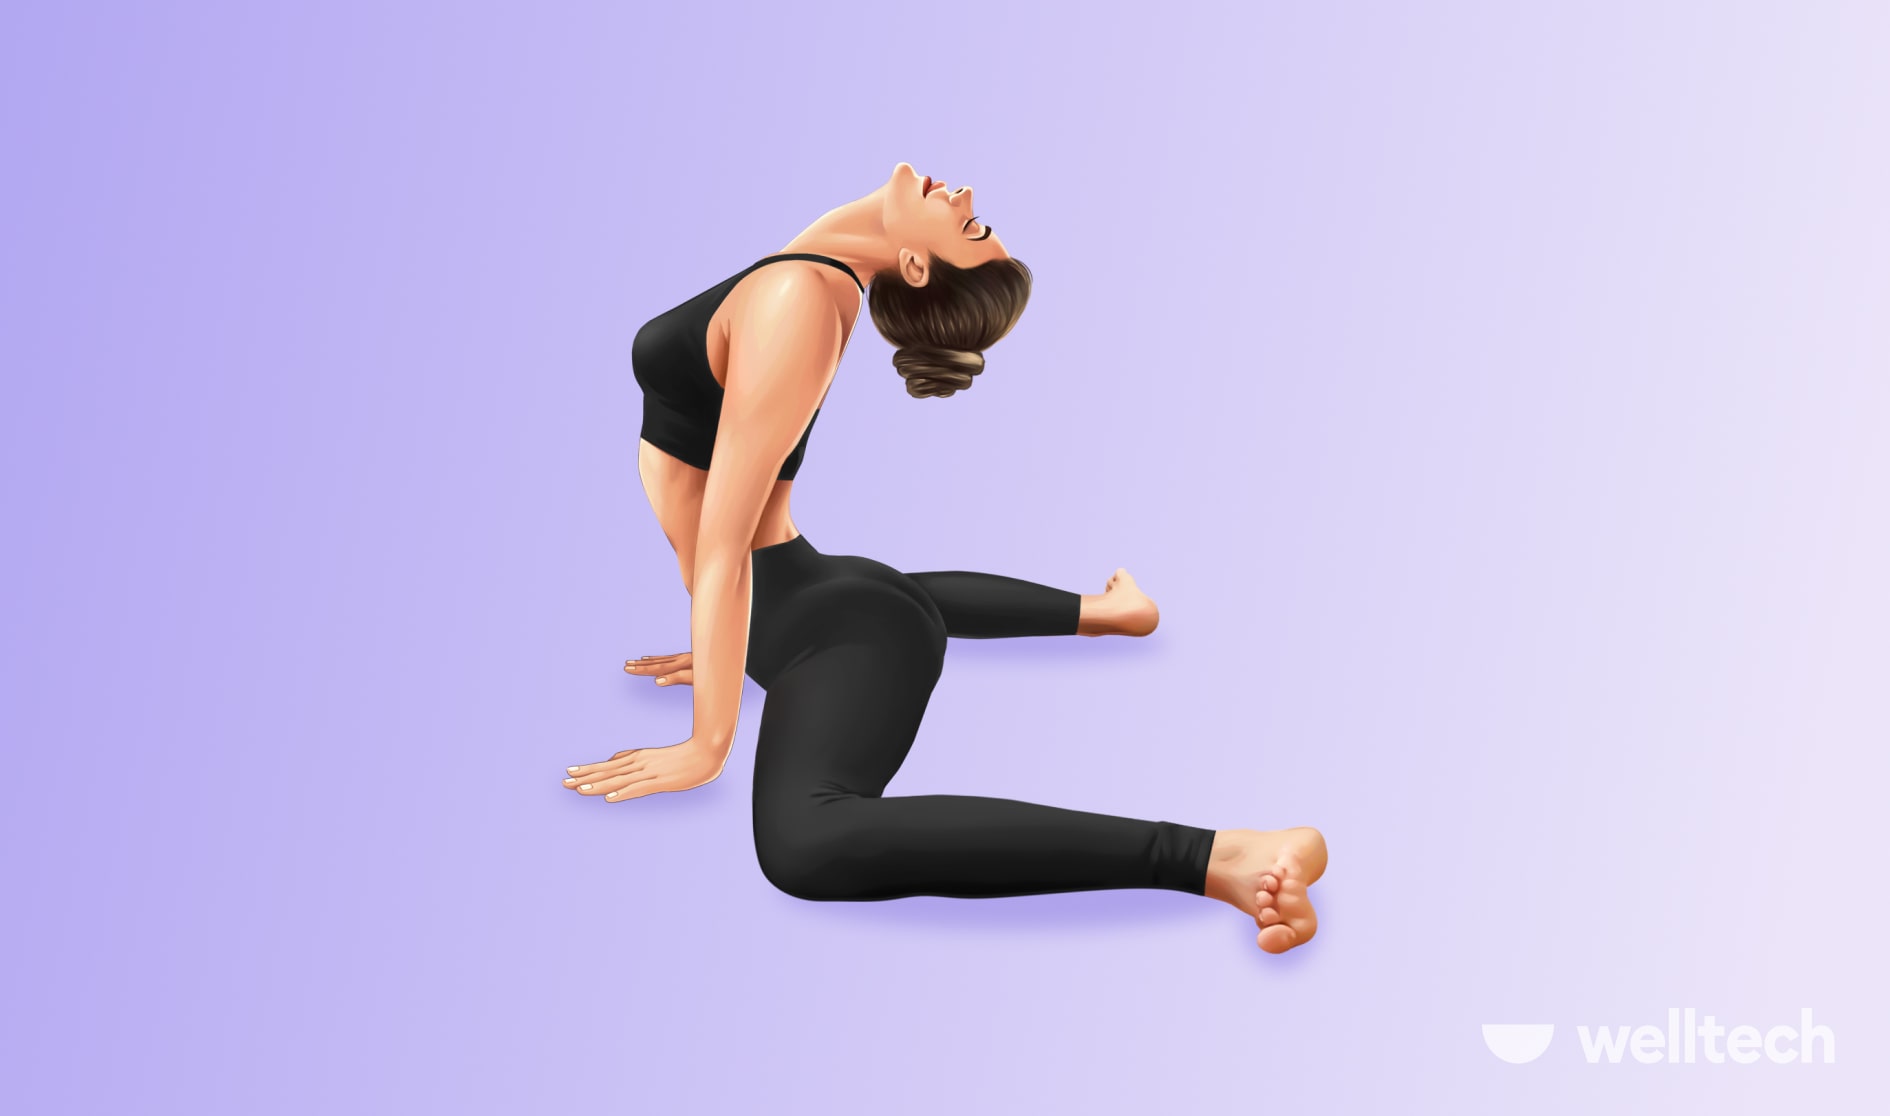 42 Frog Pose Yoga Stock Video Footage - 4K and HD Video Clips | Shutterstock-thanhphatduhoc.com.vn